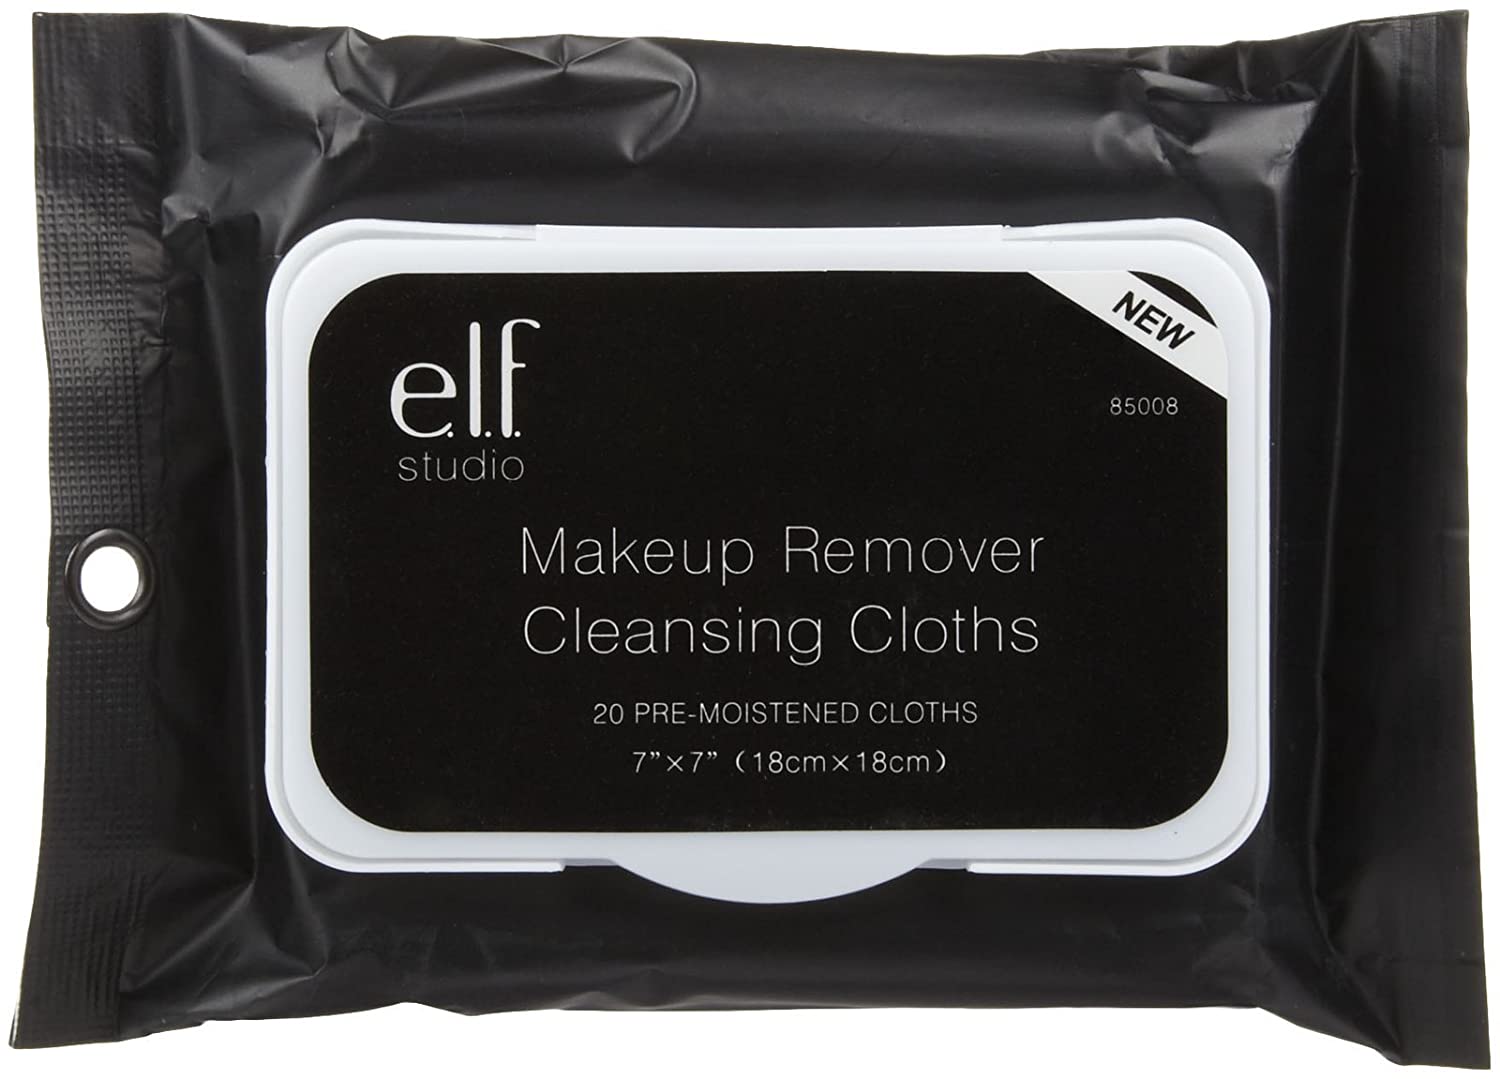 e.l.f. Makeup Remover Cleansing Cloths Pack